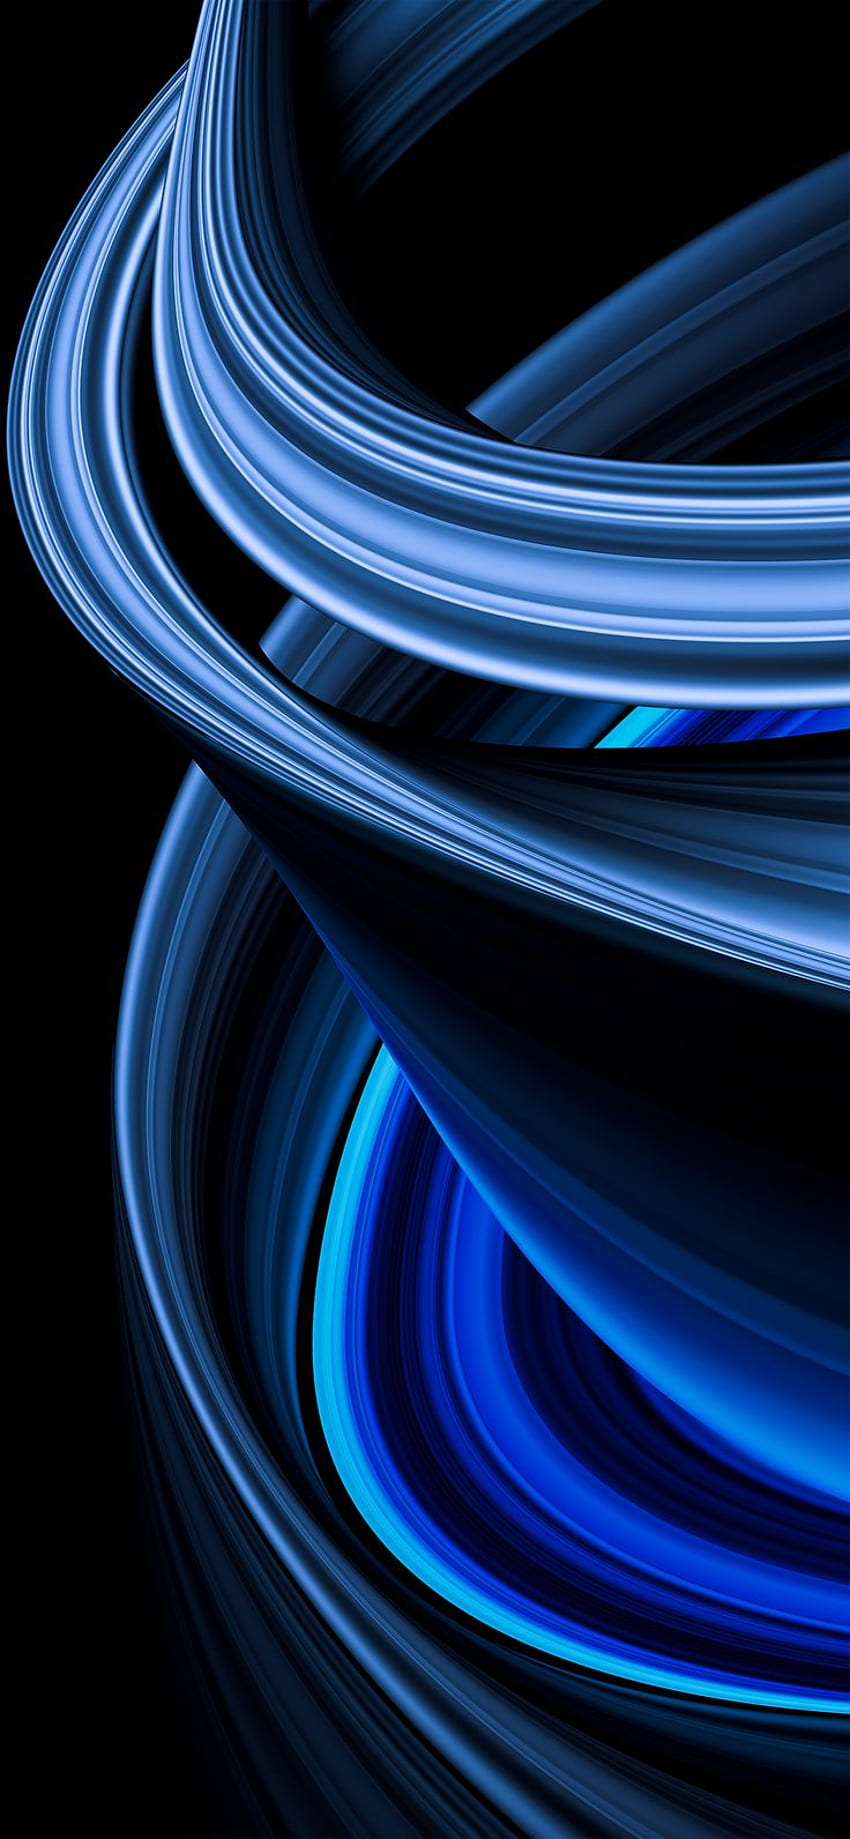 Abstract Blue wrap. iPhone landscape, iphone summer, Black and blue, Black and Blue Cool iPhone HD phone wallpaper